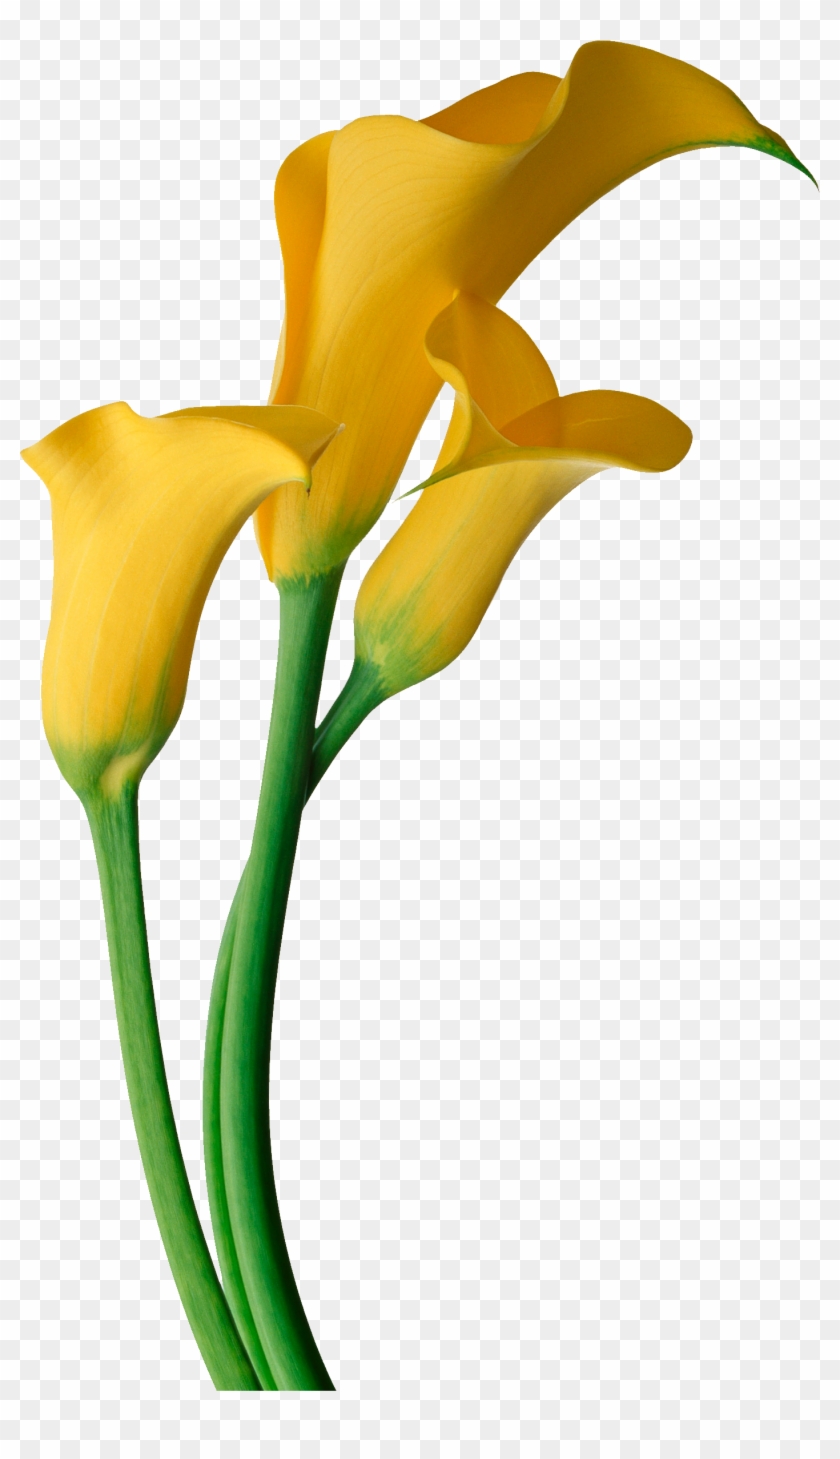 Yellow Calla Lily Flower Png Clipart